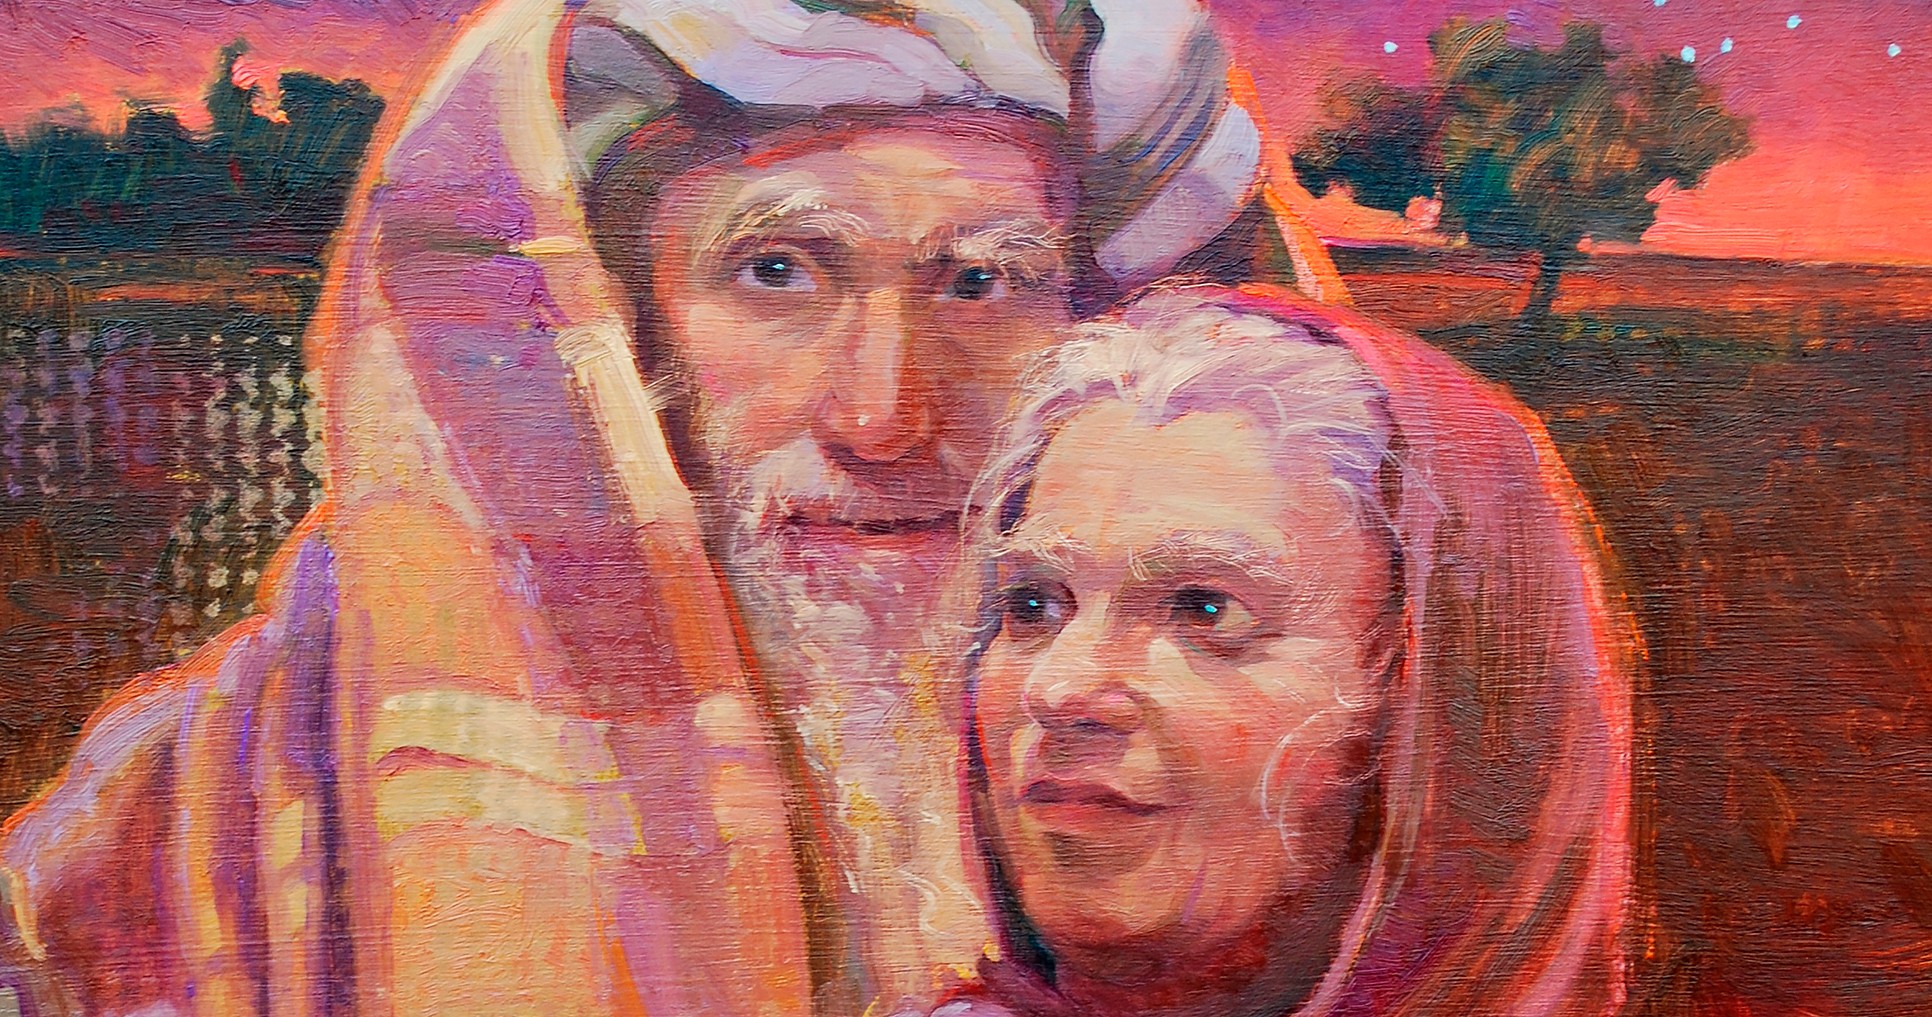 Full color illustration of Abraham and Sarah from the old testament.